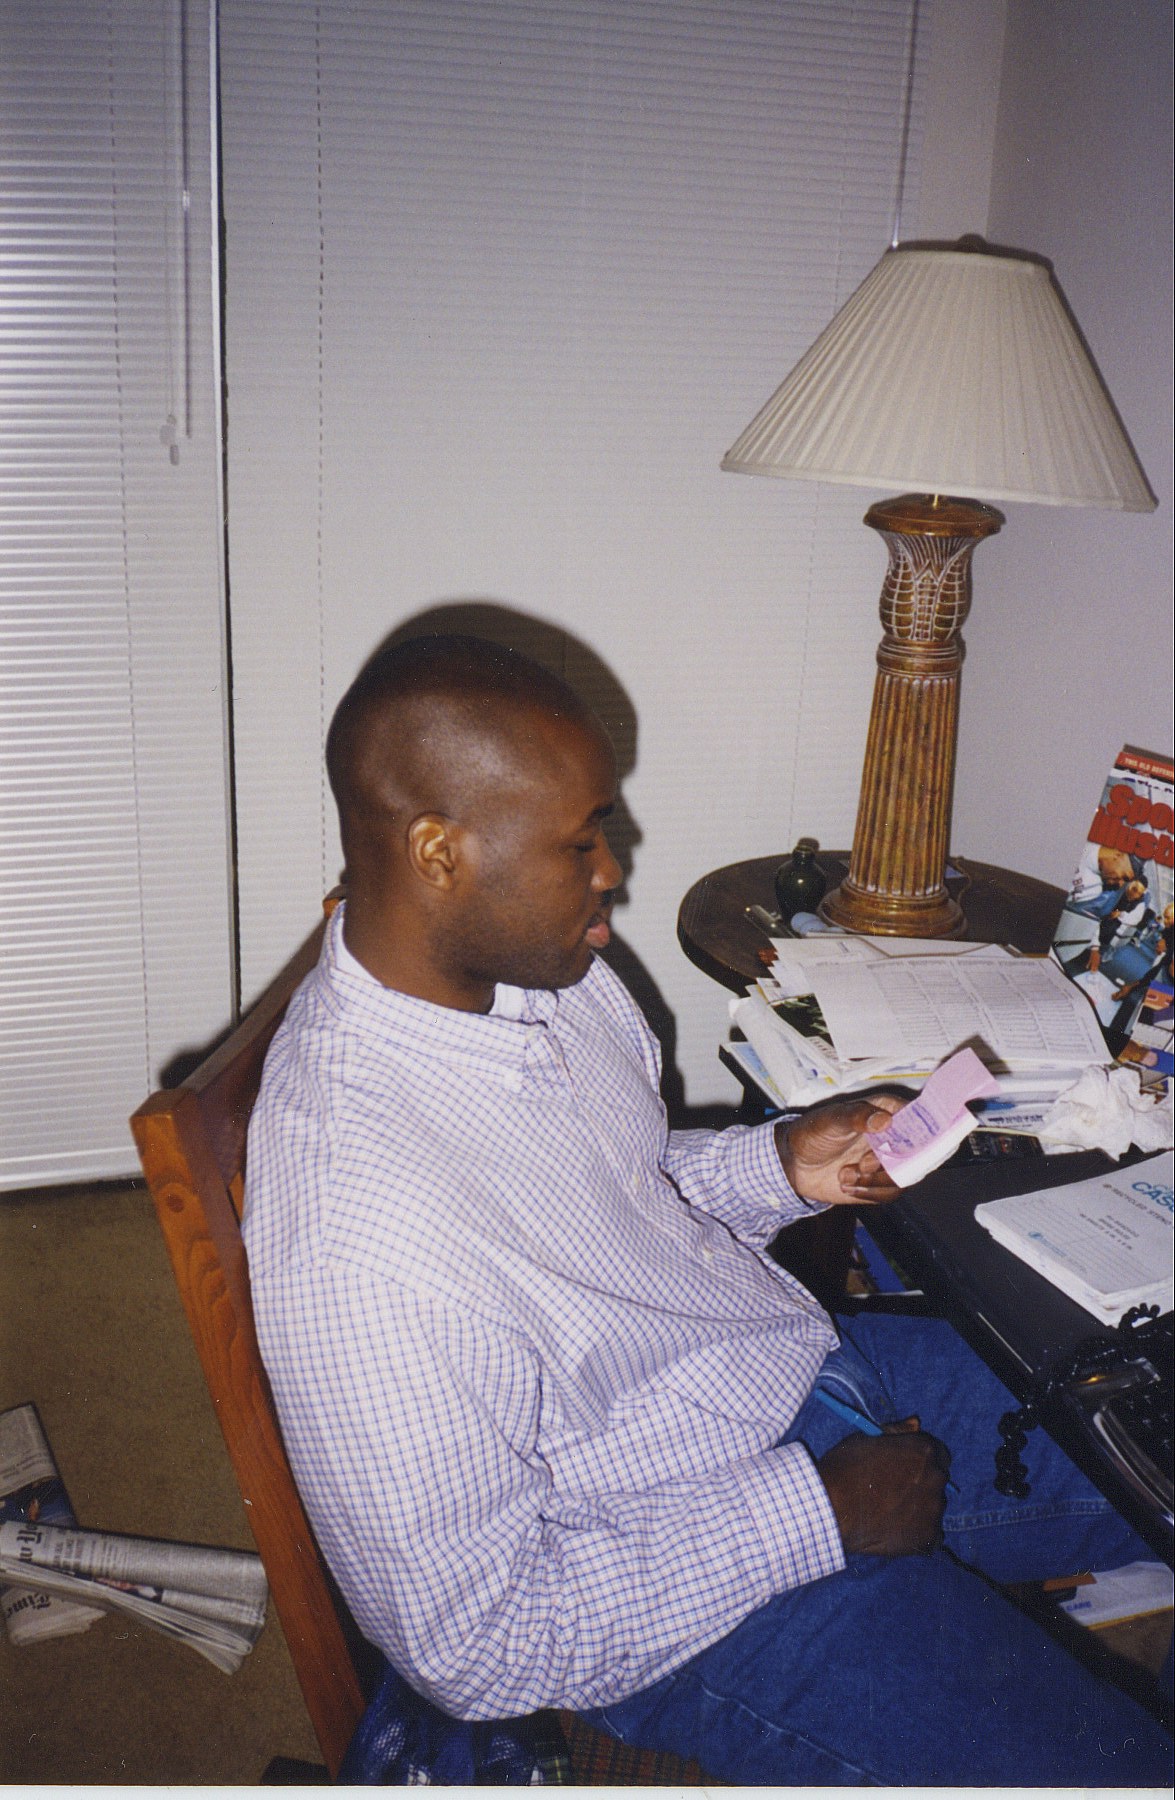   I'm checking out my to-do list at my home office in Seattle, where I lived from 1997 to 2002.    